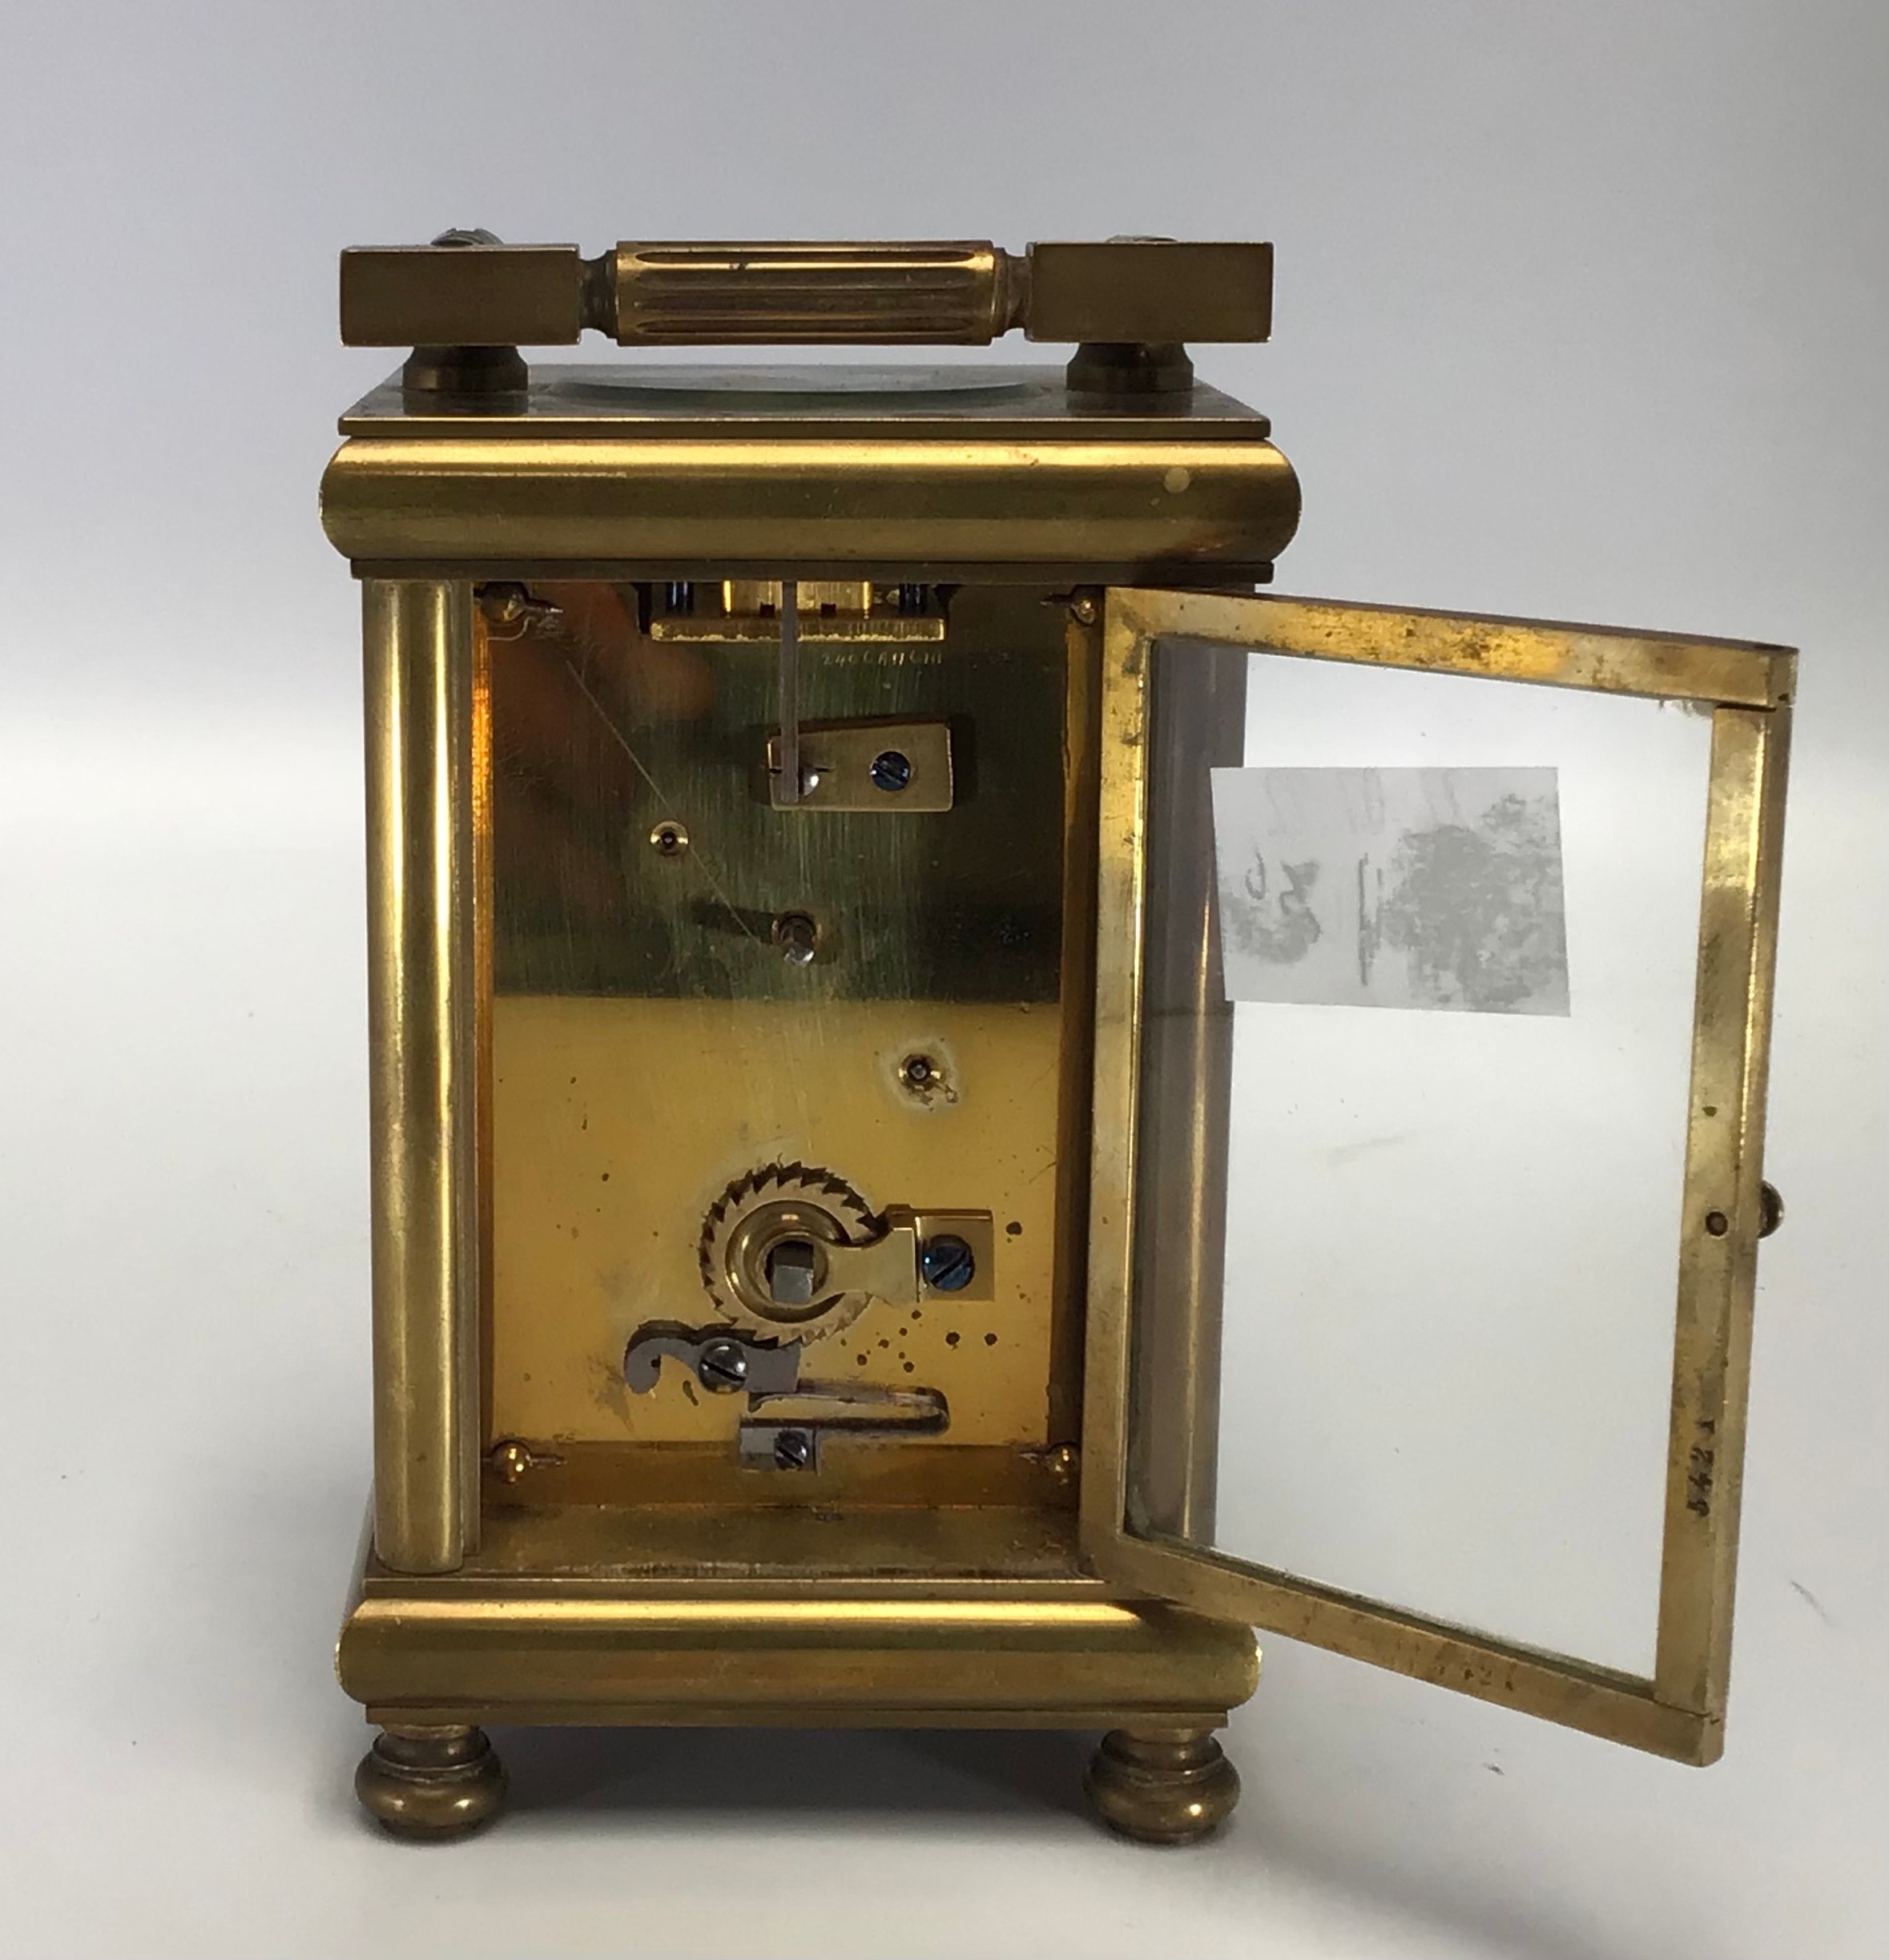 A Swiss brass cased carriage clock with blue and white porcelain panelled sides and dial panel, - Image 8 of 8